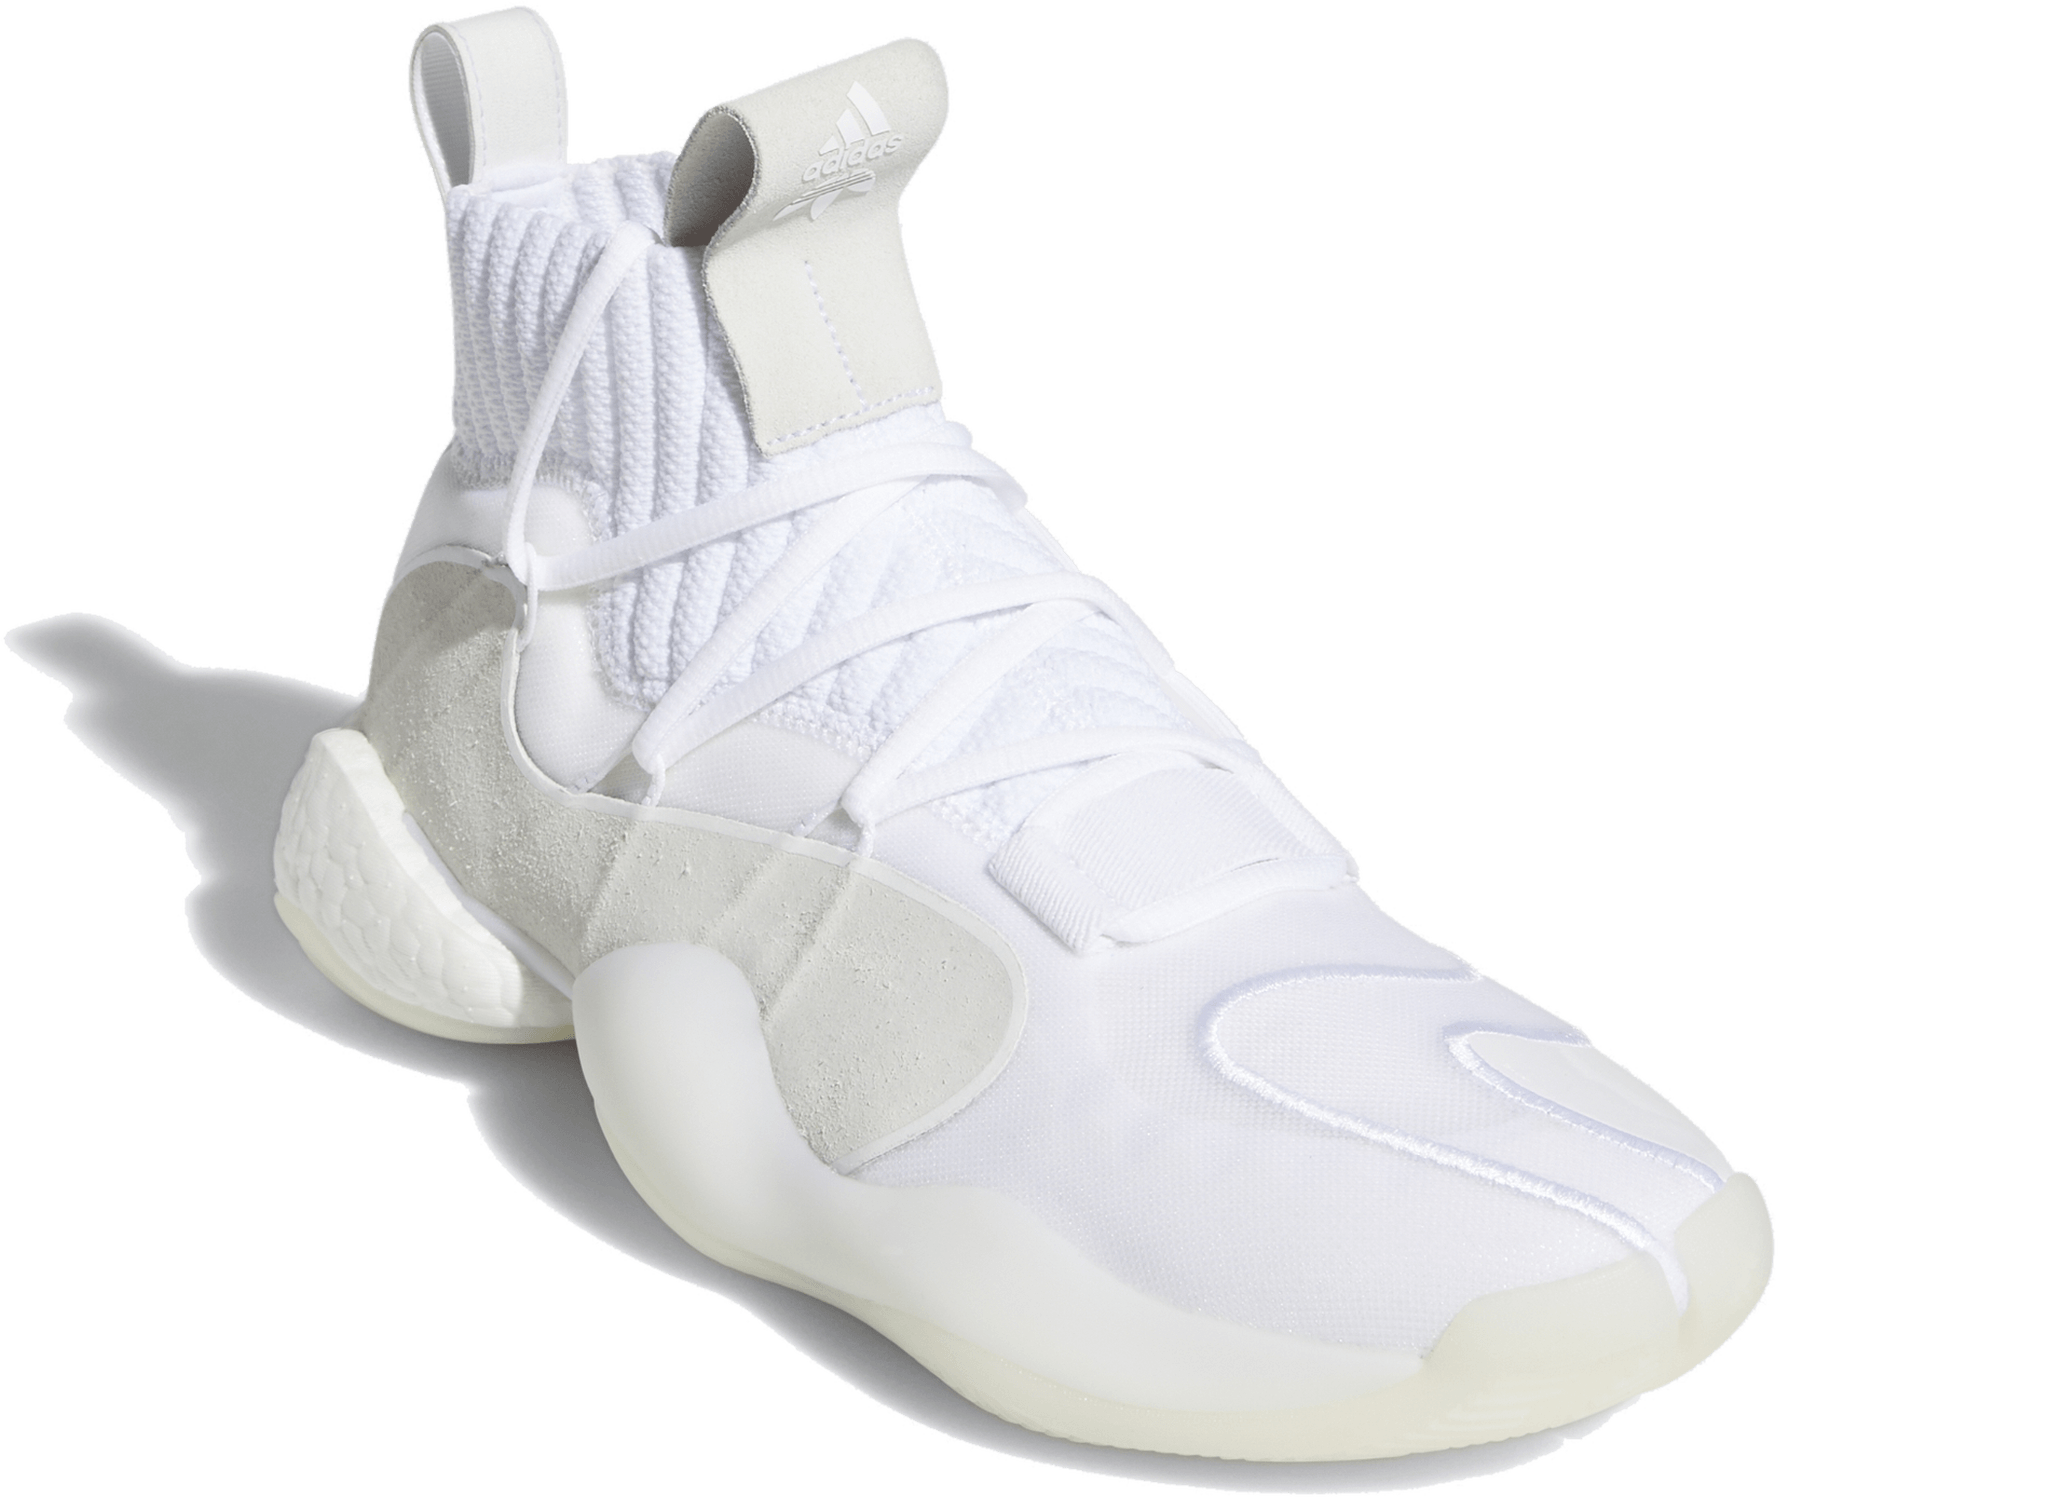 adidas crazy byw x performance review